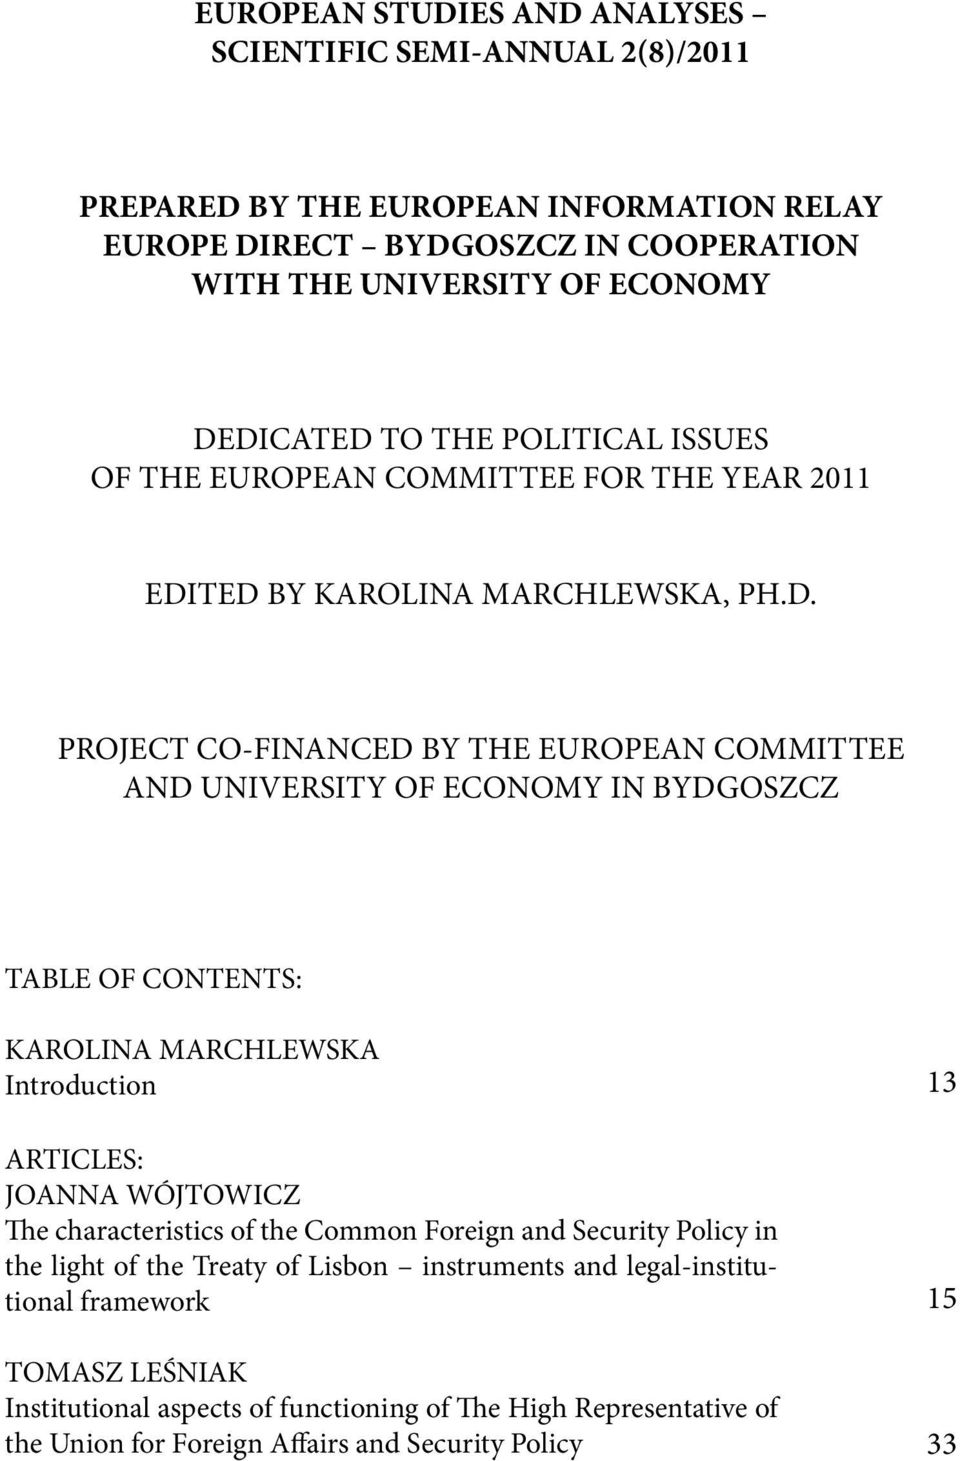 TED BY KAROLINA MARCHLEWSKA, PH.D. PROJECT CO-FINANCED BY THE EUROPEAN COMMITTEE AND UNIVERSITY OF ECONOMY IN BYDGOSZCZ TABLE OF CONTENTS: KAROLINA MARCHLEWSKA Introduction ARTICLES: